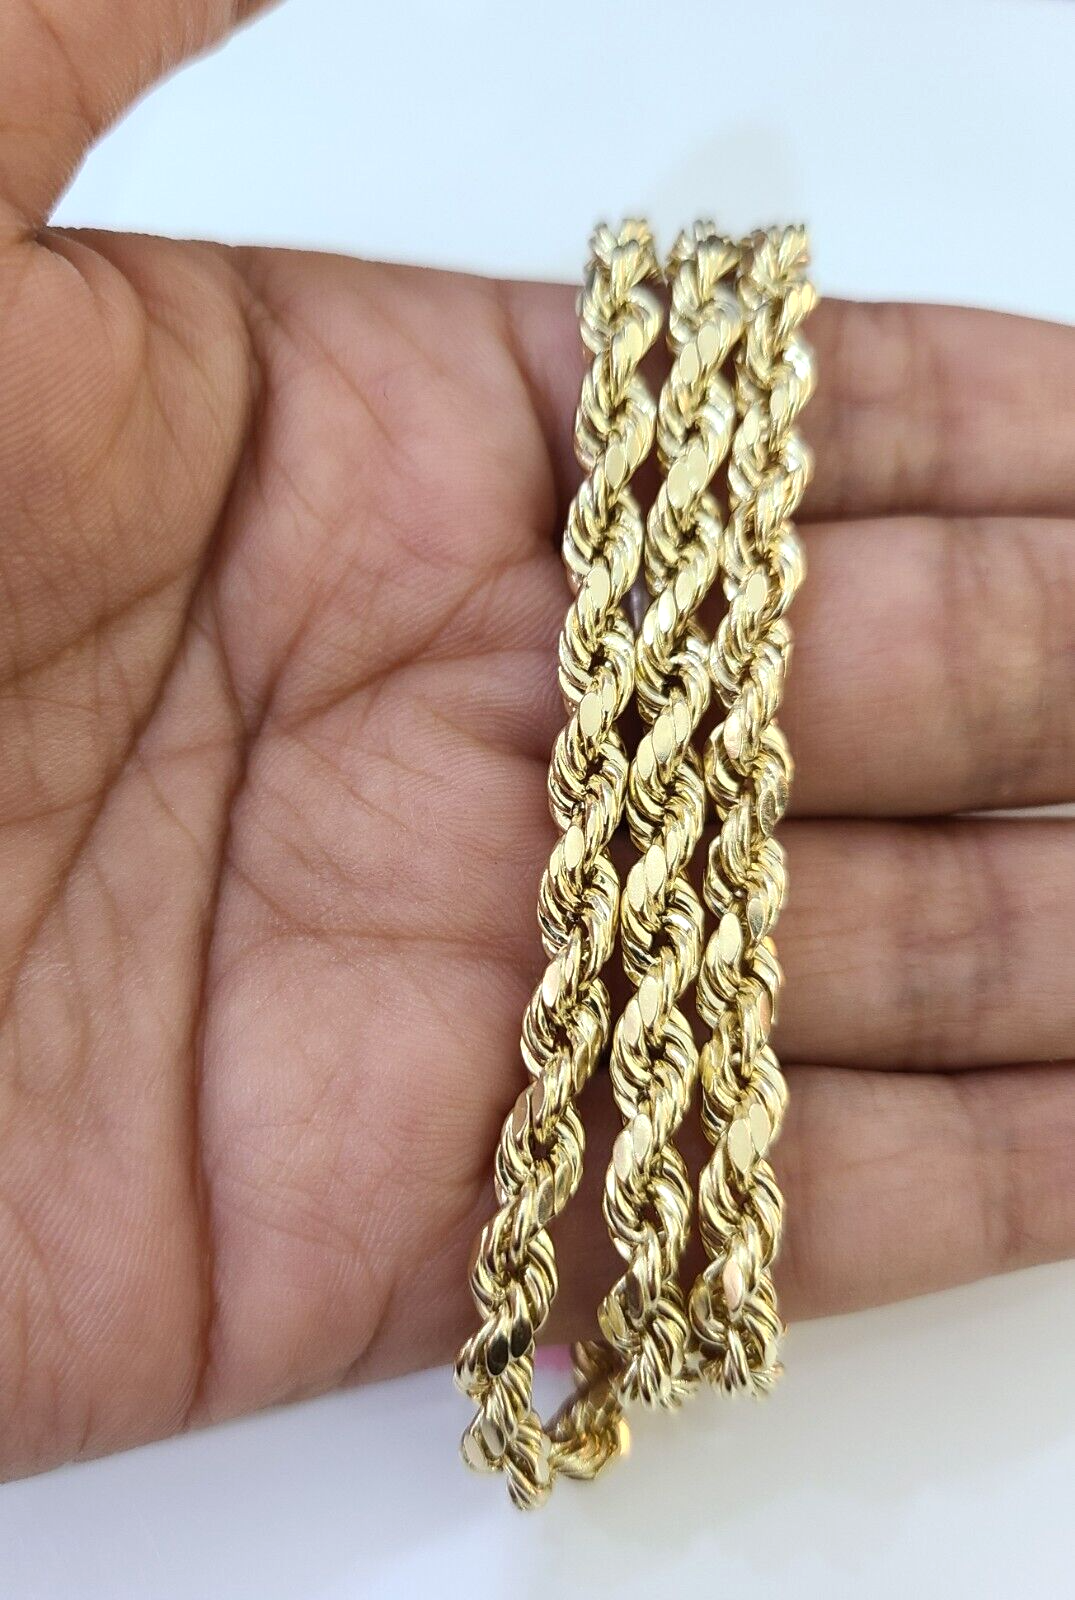 14K Yellow Gold 5mm Rope Chain 22 Inch Diamond cuts necklace , Real 14KT For Men